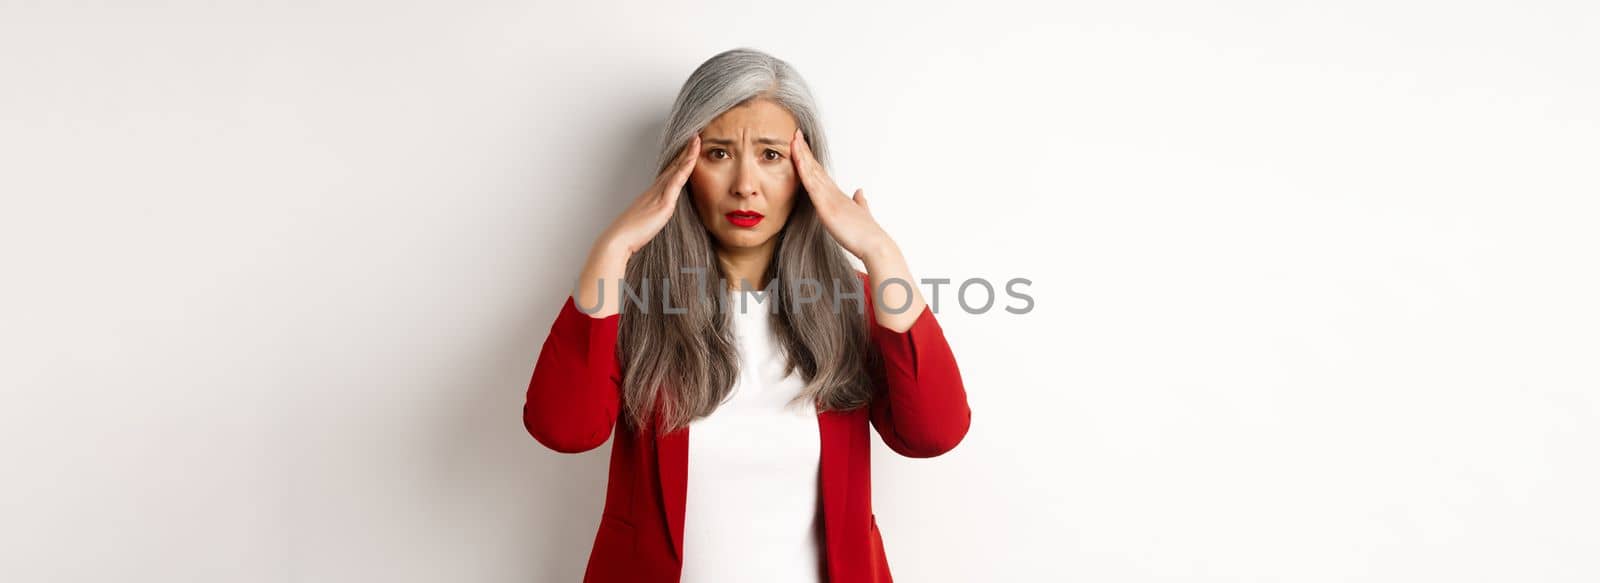 Troubled asian female entrepreneur having headache, touching head and frowning, standing over white background.